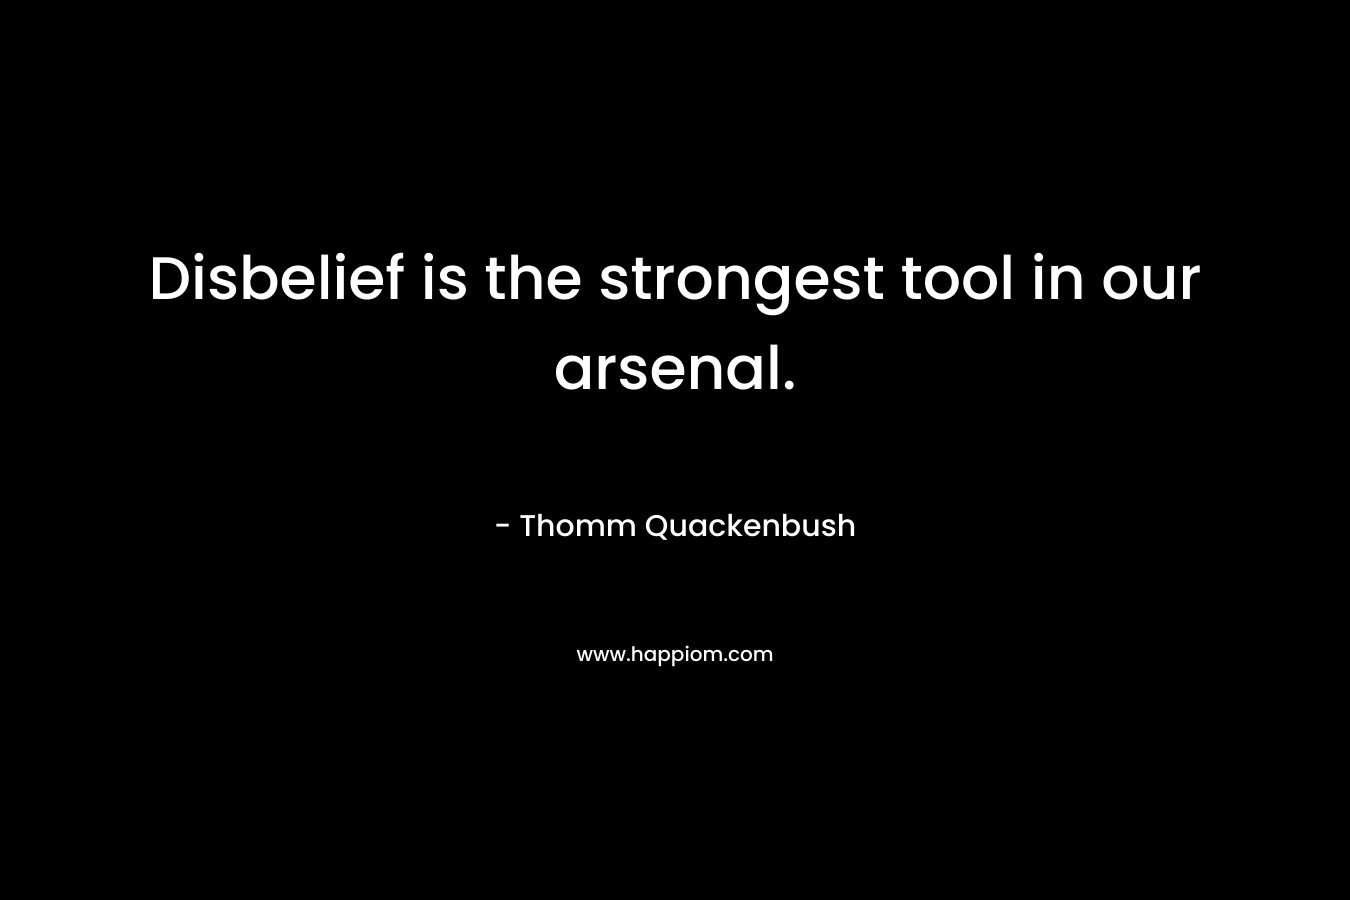 Disbelief is the strongest tool in our arsenal. – Thomm Quackenbush